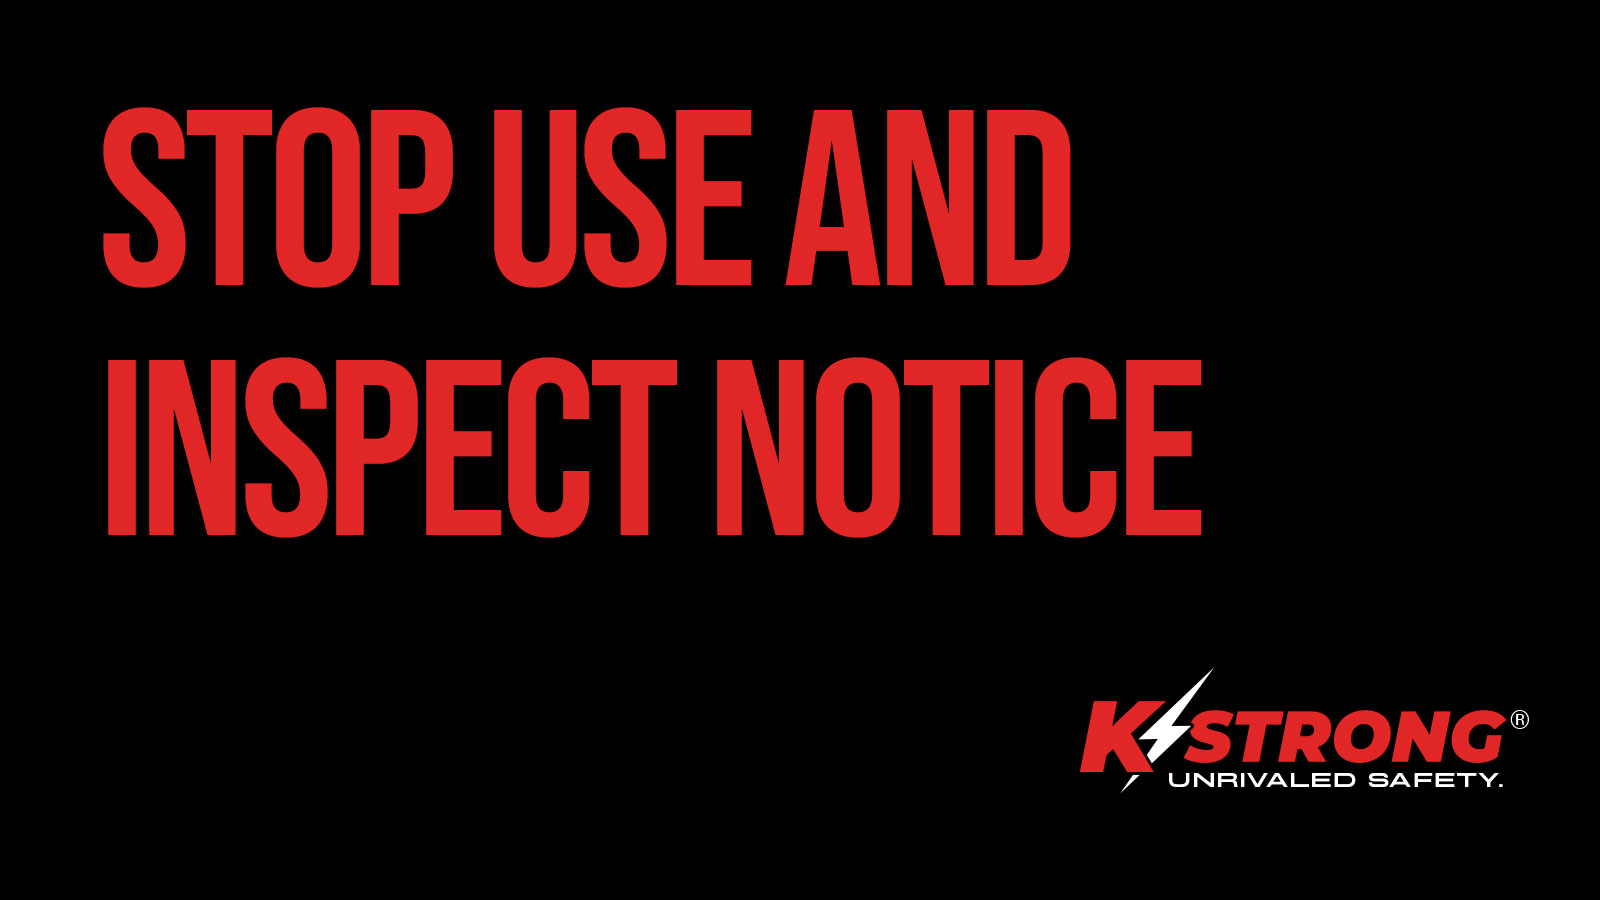 Immediate Stop Use and Inspect Notice // Notice #: KS01-21